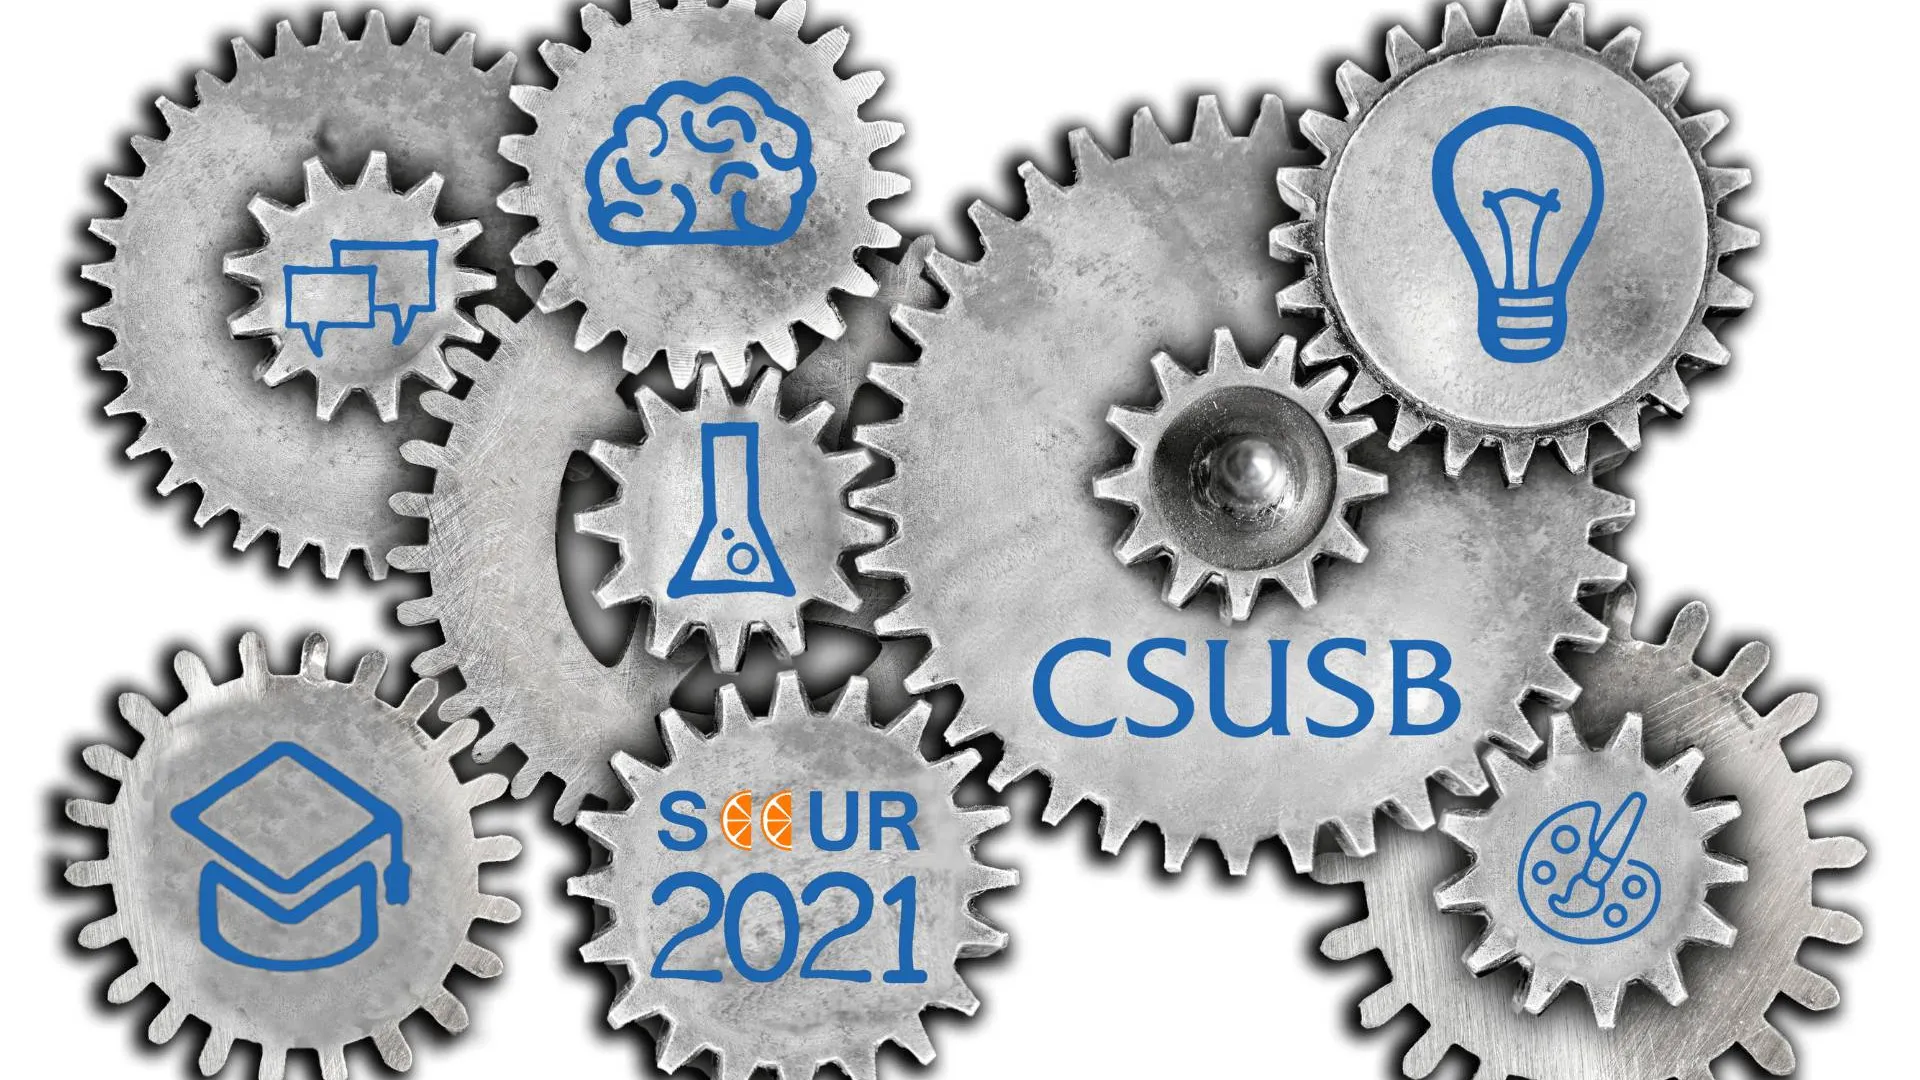 "2021 Southern California conference for undergraduate Research"